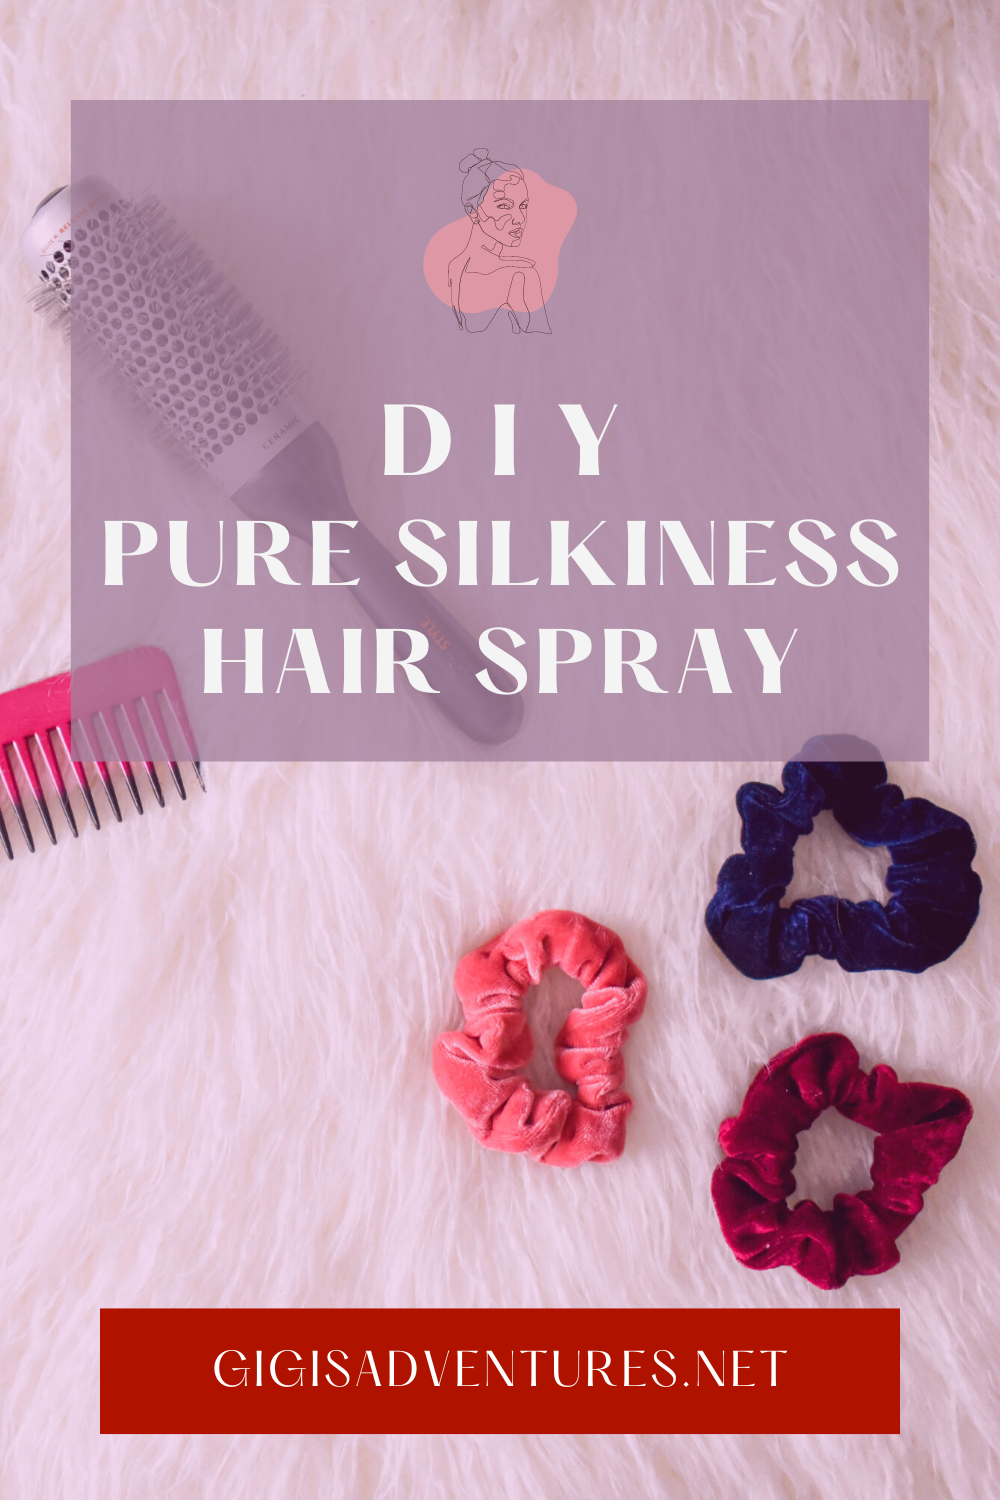 DIY Pure Silkiness Hair Spray - for Smooth, Shiny, Hydrated Hair